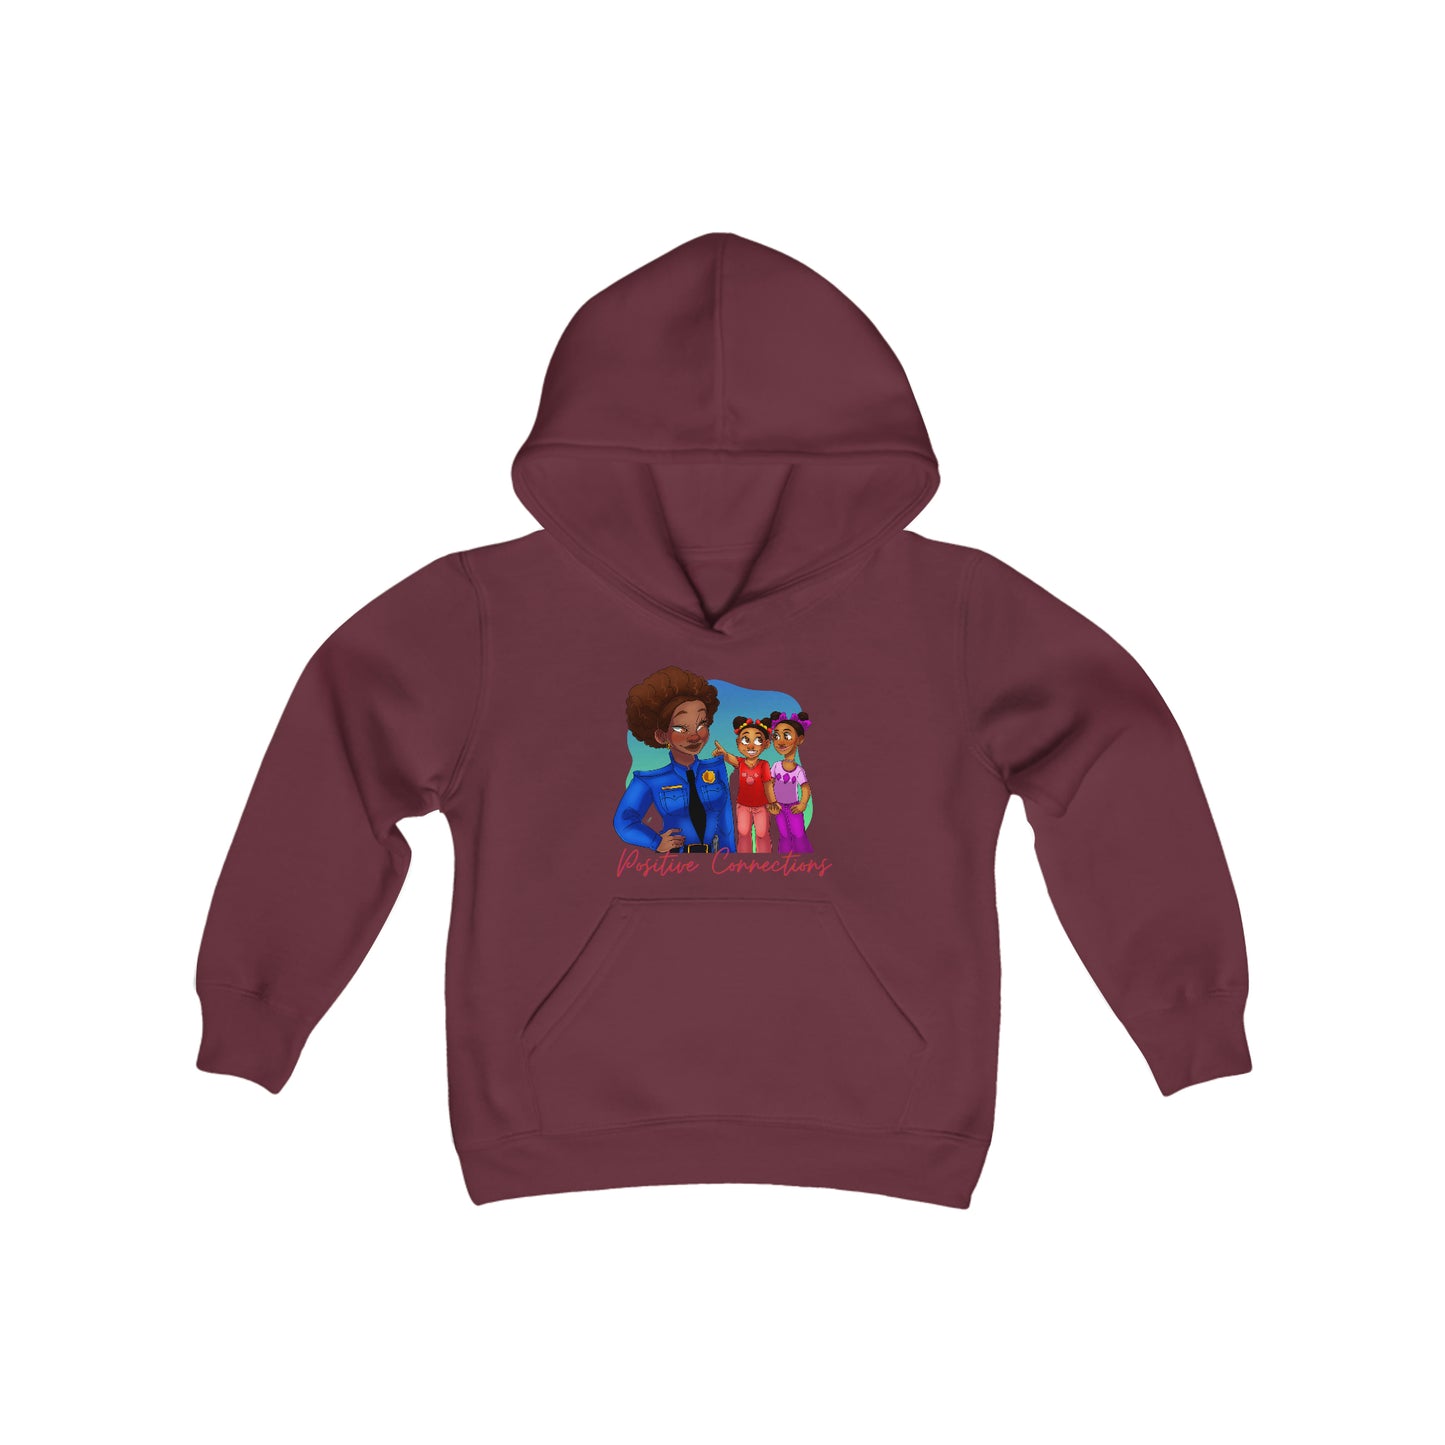 Twins in the City: Youth Heavy Blend Hooded Sweatshirt